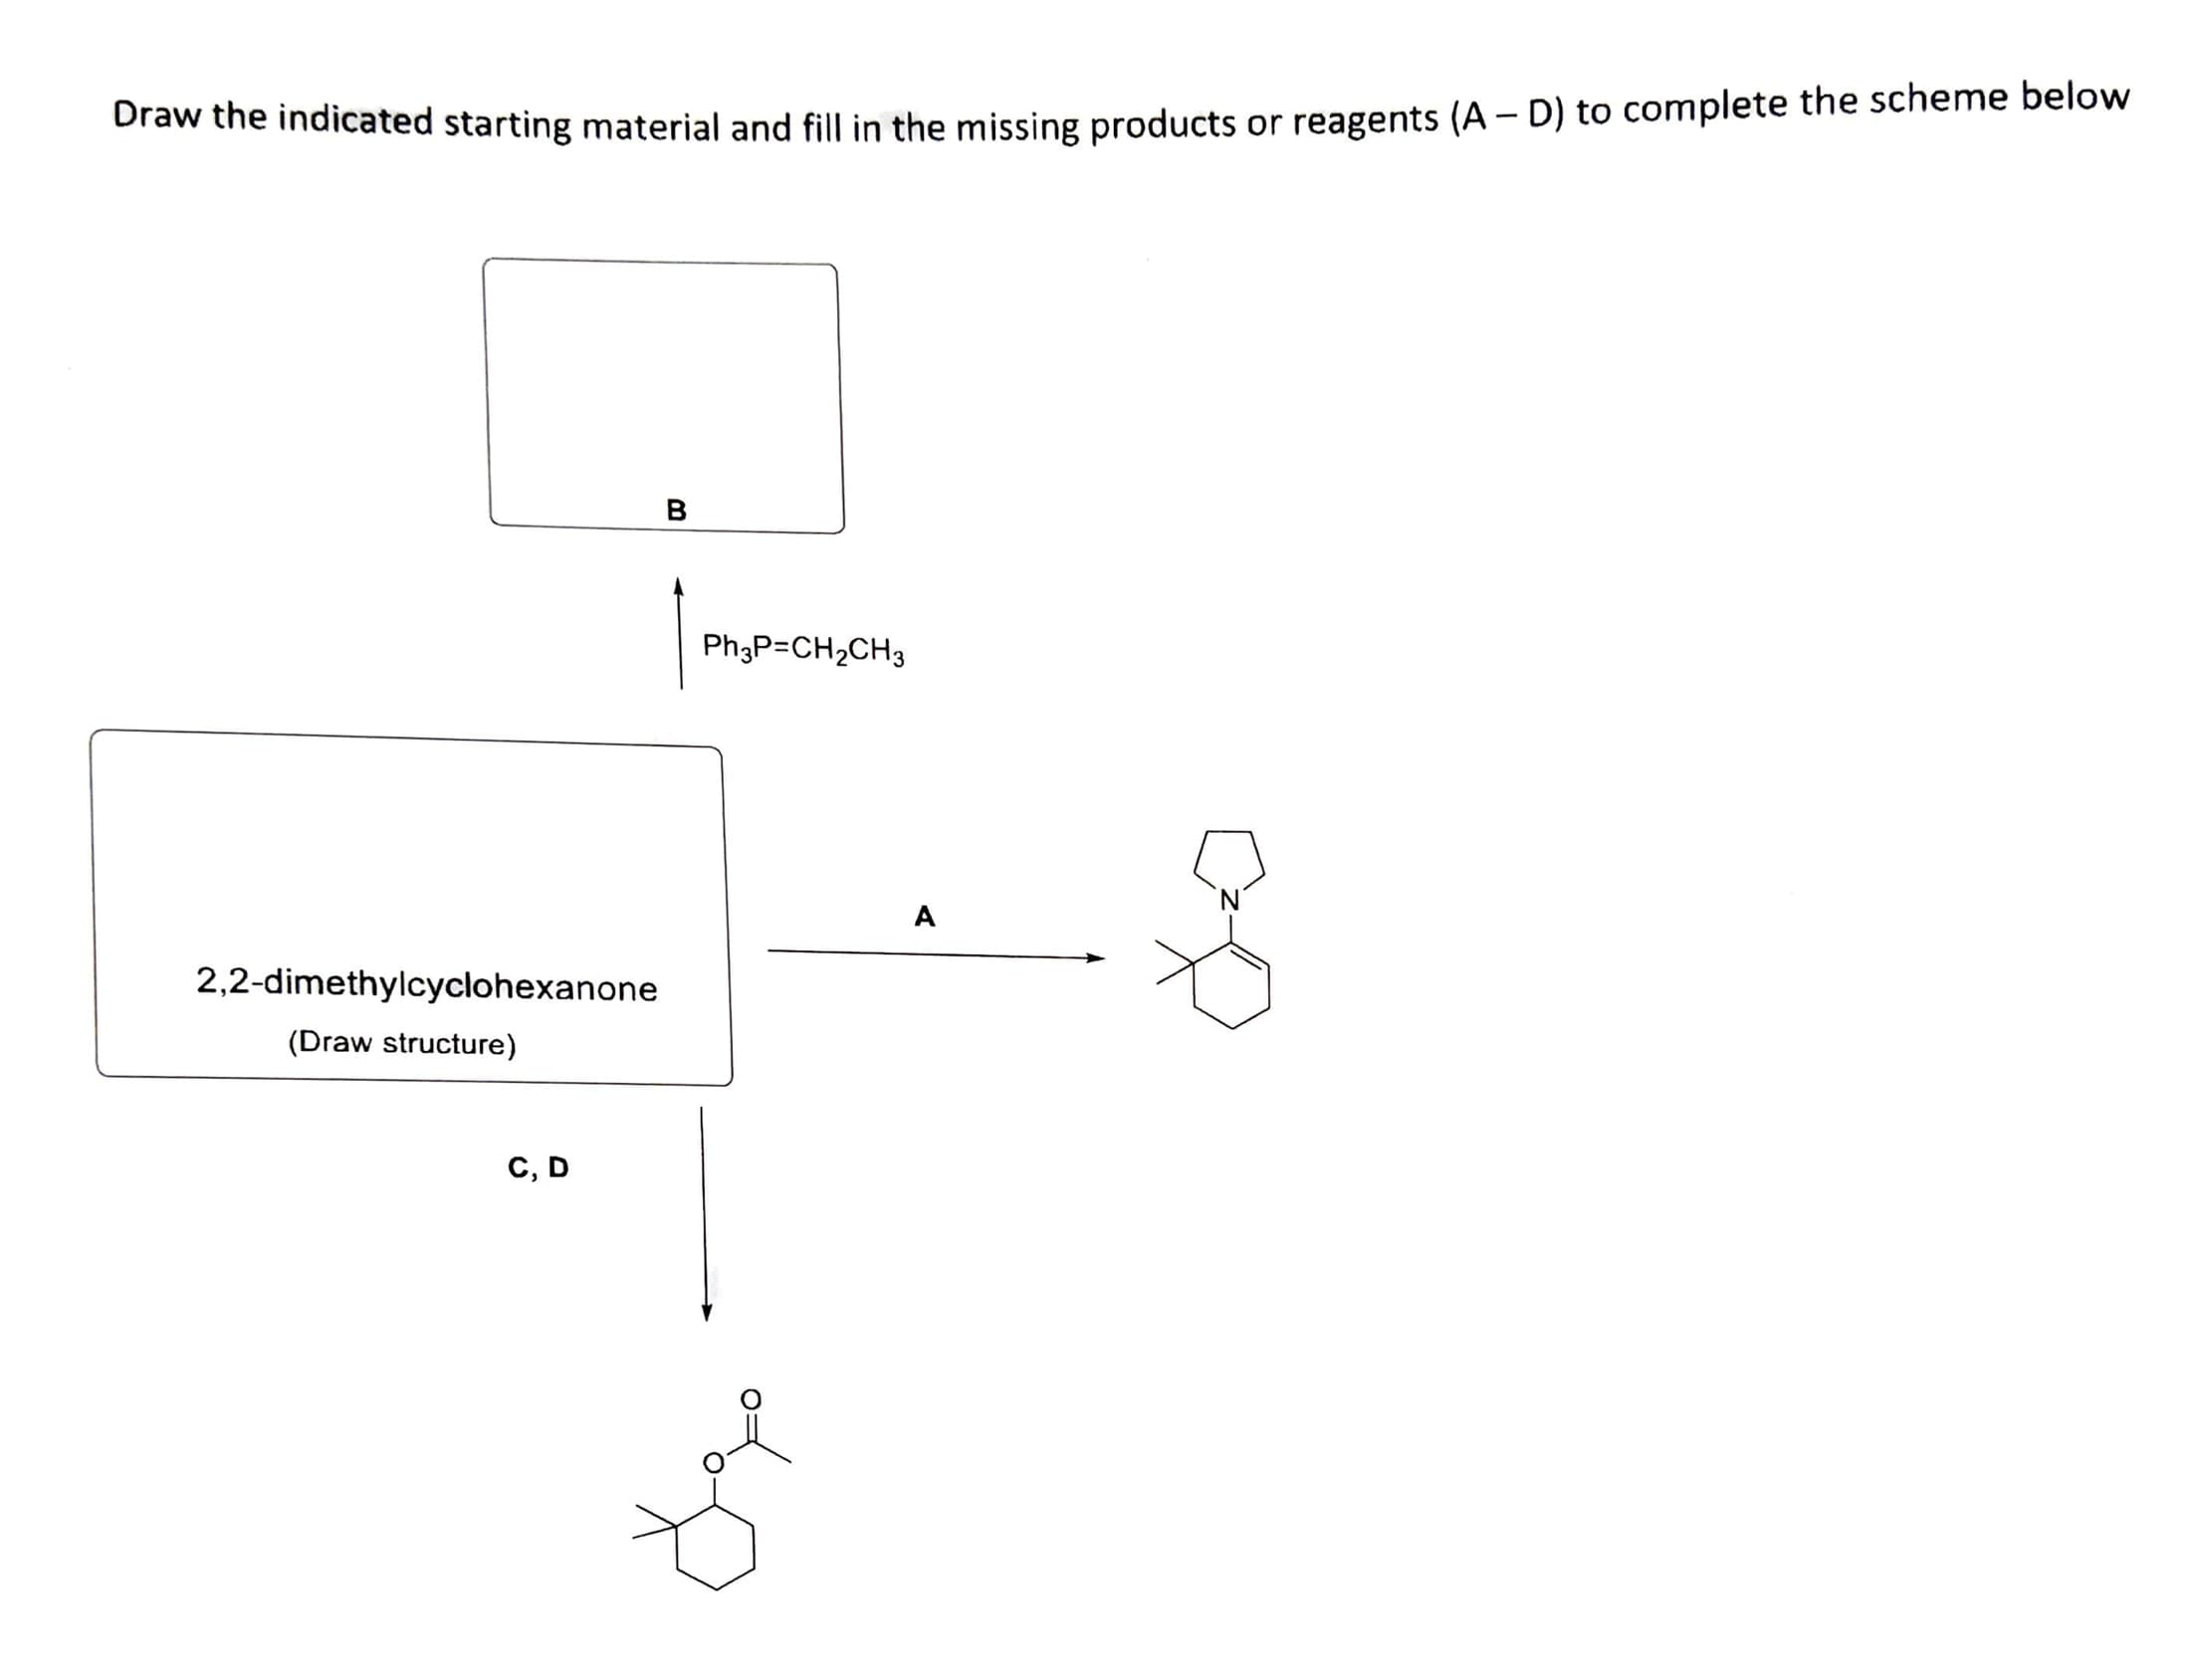 Draw the indicated starting material and fill in the missing products or reagents (A – D) to complete the scheme below
в
Ph;P=CH2CH3
A
2,2-dimethylcyclohexanone
(Draw structure)
C, D
